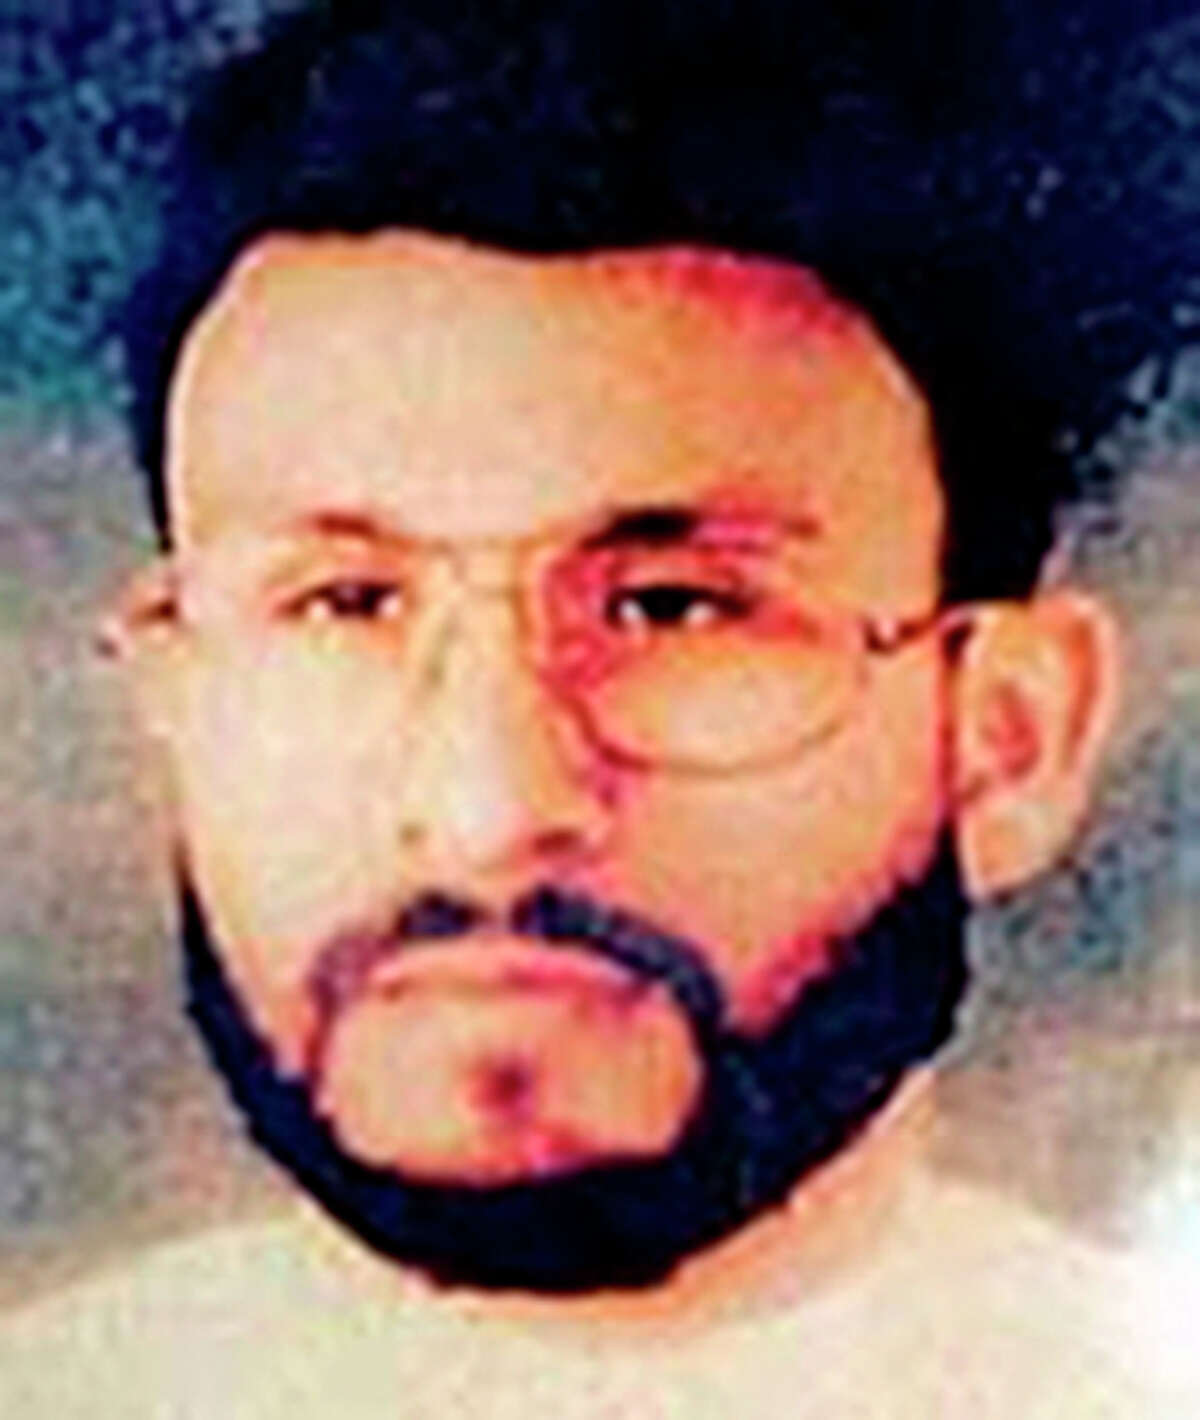 This undated file photo provided by U.S. Central Command, shows Abu Zubaydah, date and location unknown. Zubaydah was the CIA’s guinea pig. He was the first high-profile al Qaida terror suspect captured after the Sept. 11 attacks and the first to vanish into the spy agency’s secret prisons, the first subjected to grinding white noise and sleep deprivation tactics and the first to gasp under the simulated drowning of waterboarding. Zubaydah’s stark ordeal became the CIA’s blueprint for the brutal treatment of terror suspects, according to the Senate Intelligence Committee’s report released Tuesday.